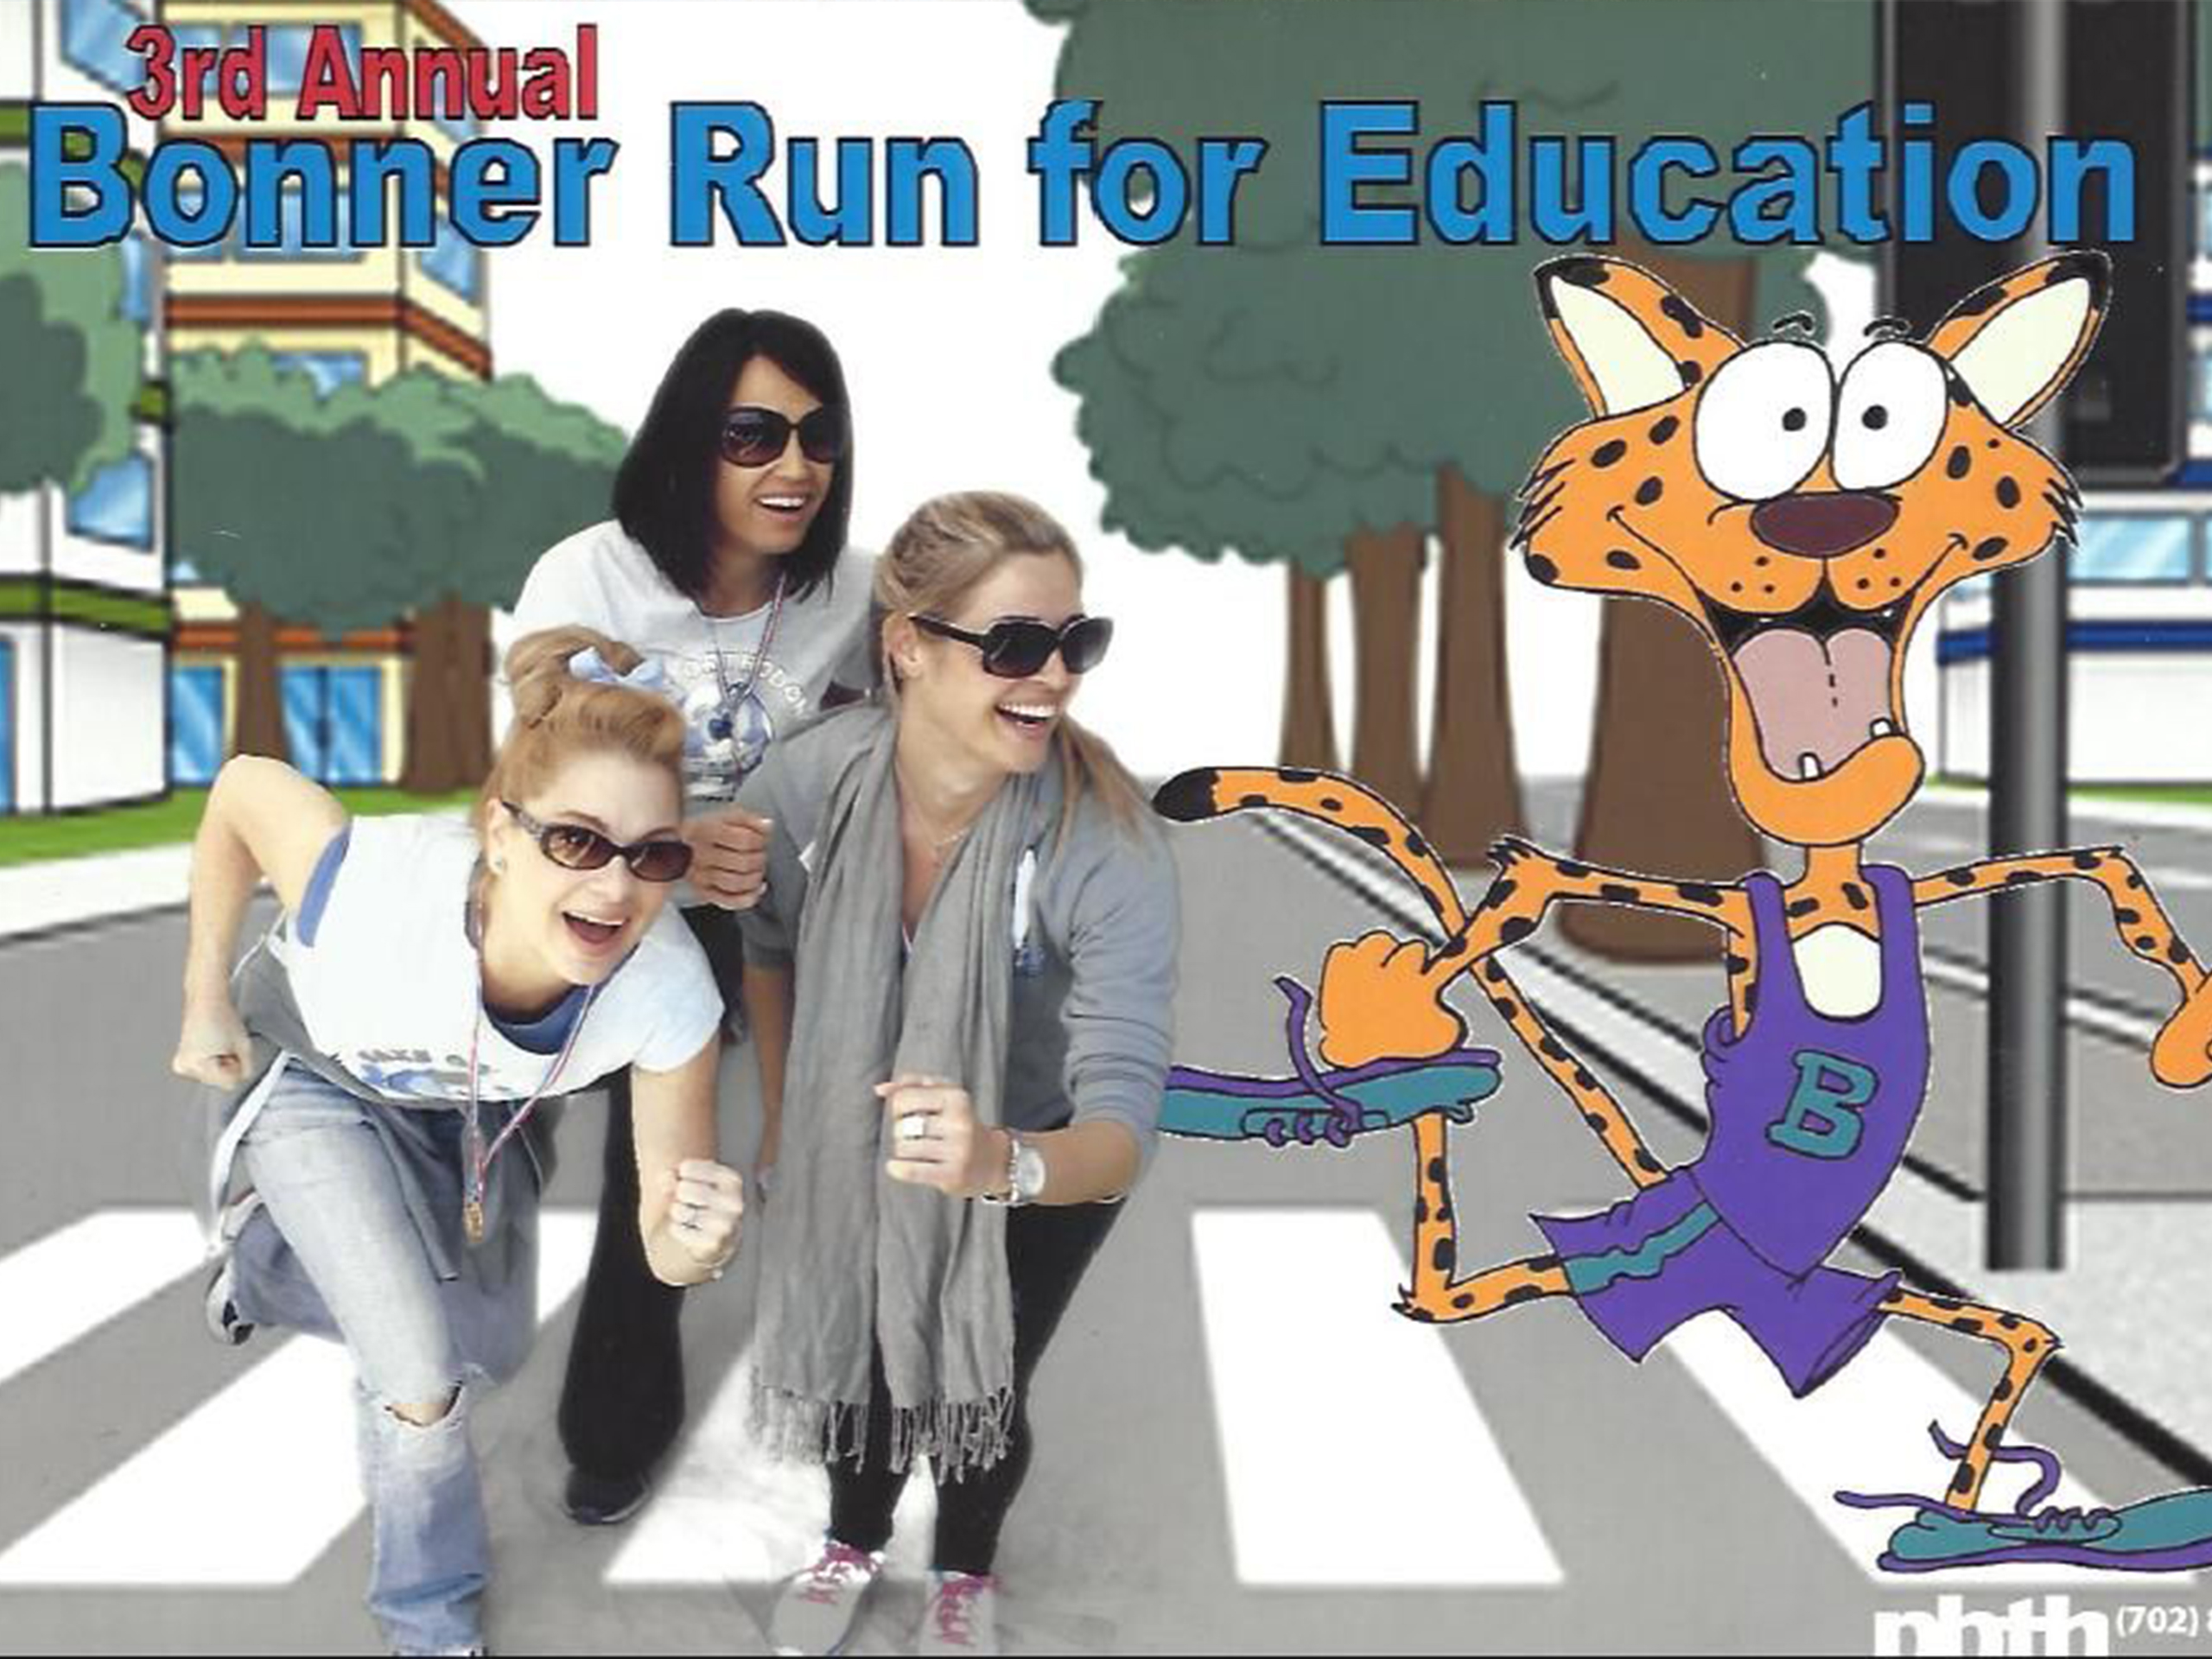 Dr. Saxe and other friends running after a cat.